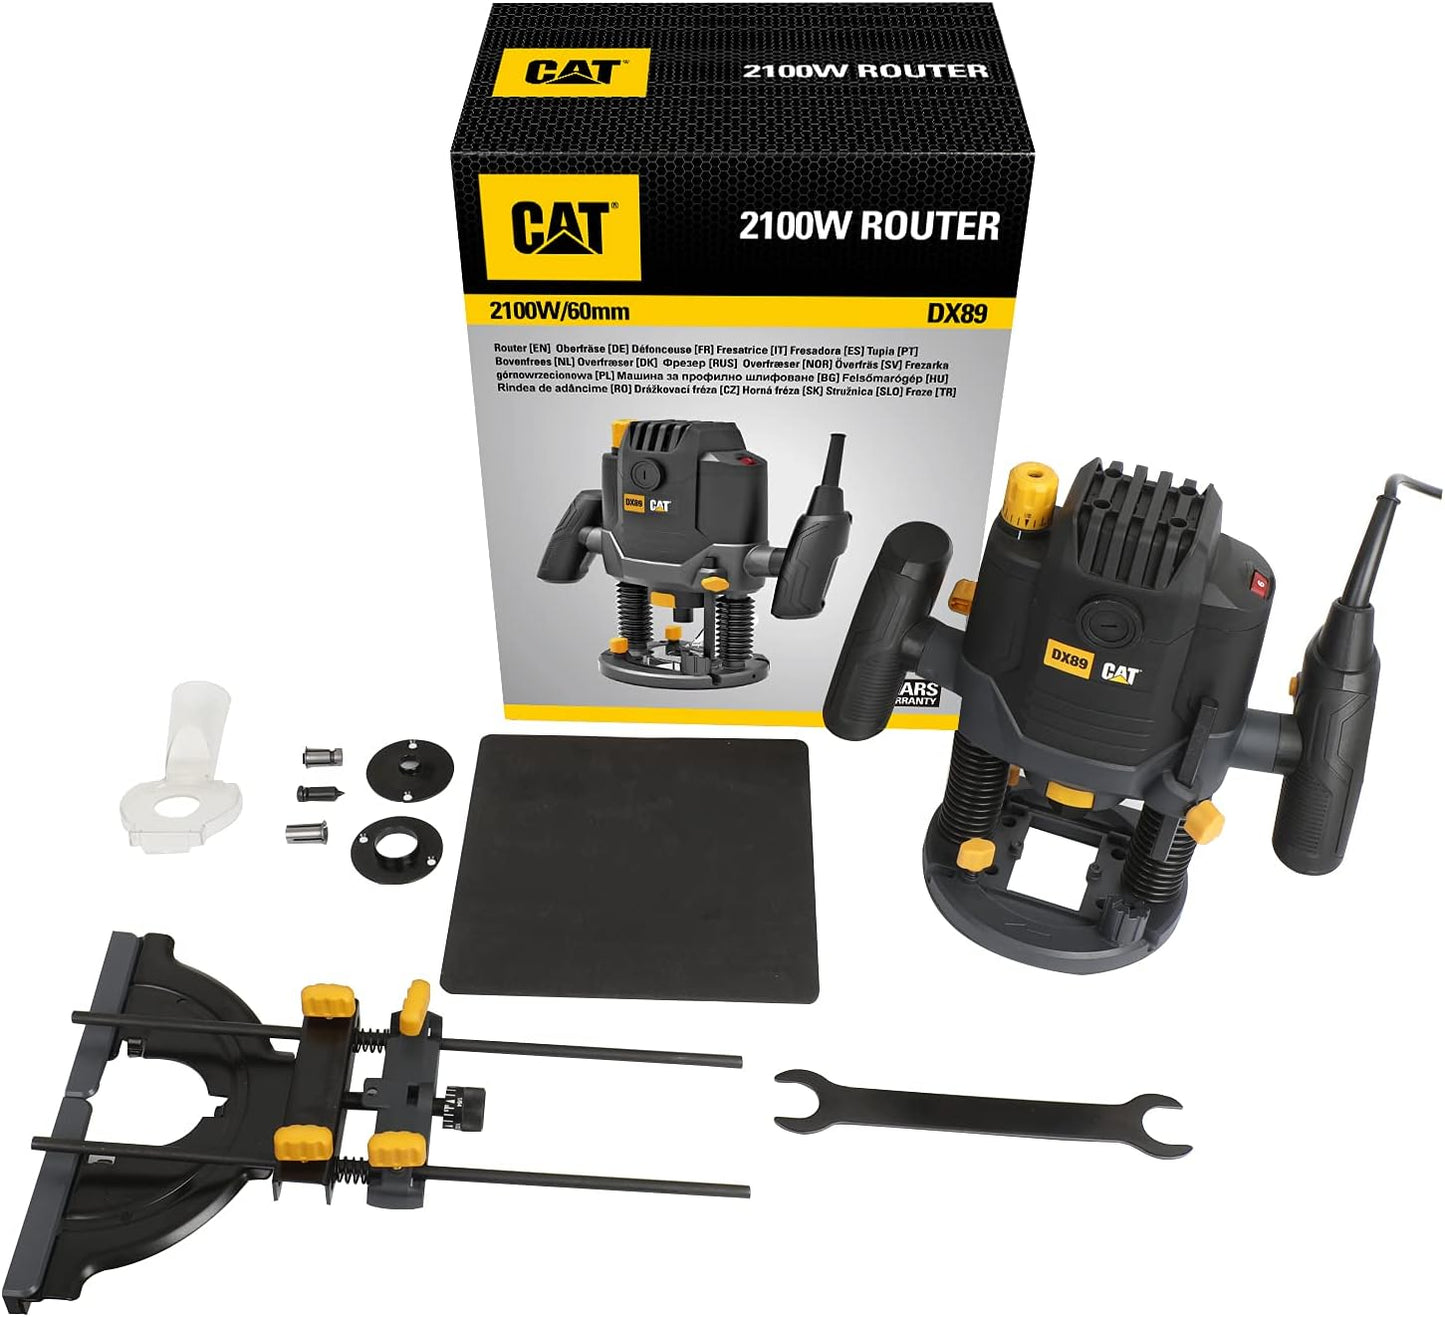 CAT DX89 Router AC Power 2100W 230V